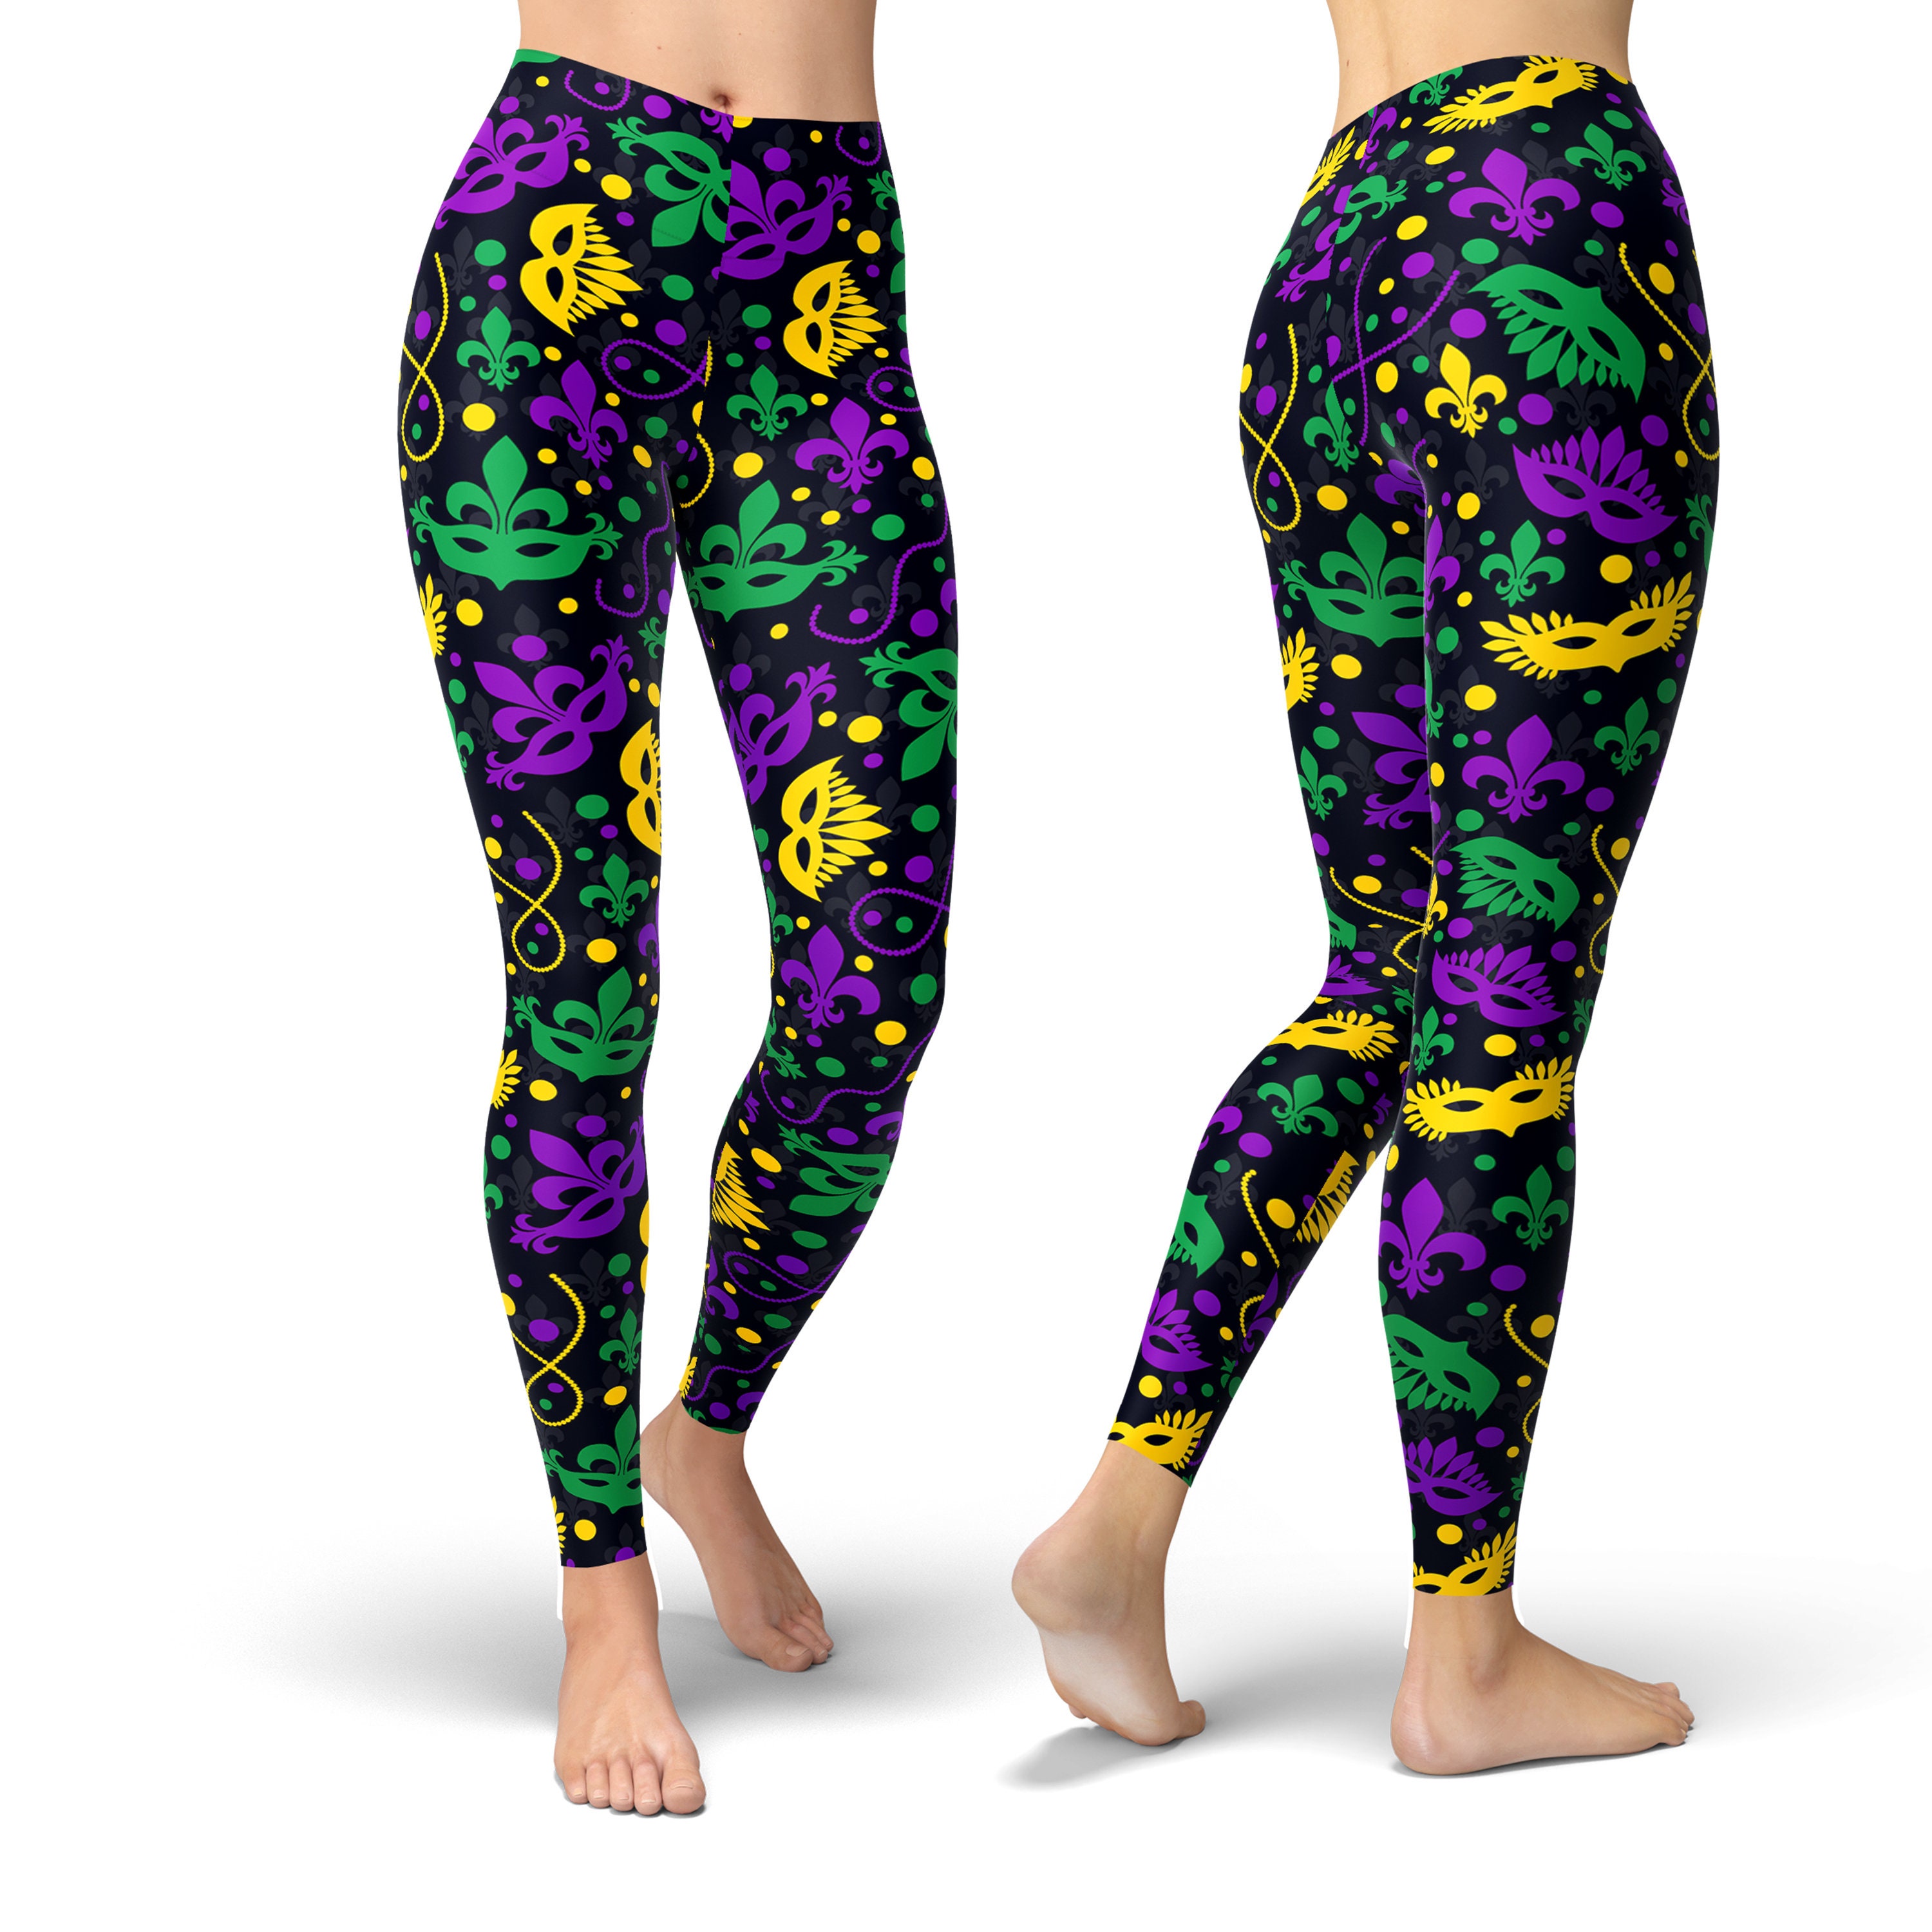  Rvidbe Women's Mardi Gras Leggings, Mardi Gras Outfit for Women  High Waist Stretchy Graphic Yoga Pants Casual Carnival Workout Running  Mardi Gras Outfit Mardi Gras Leggings for Women Black : Clothing